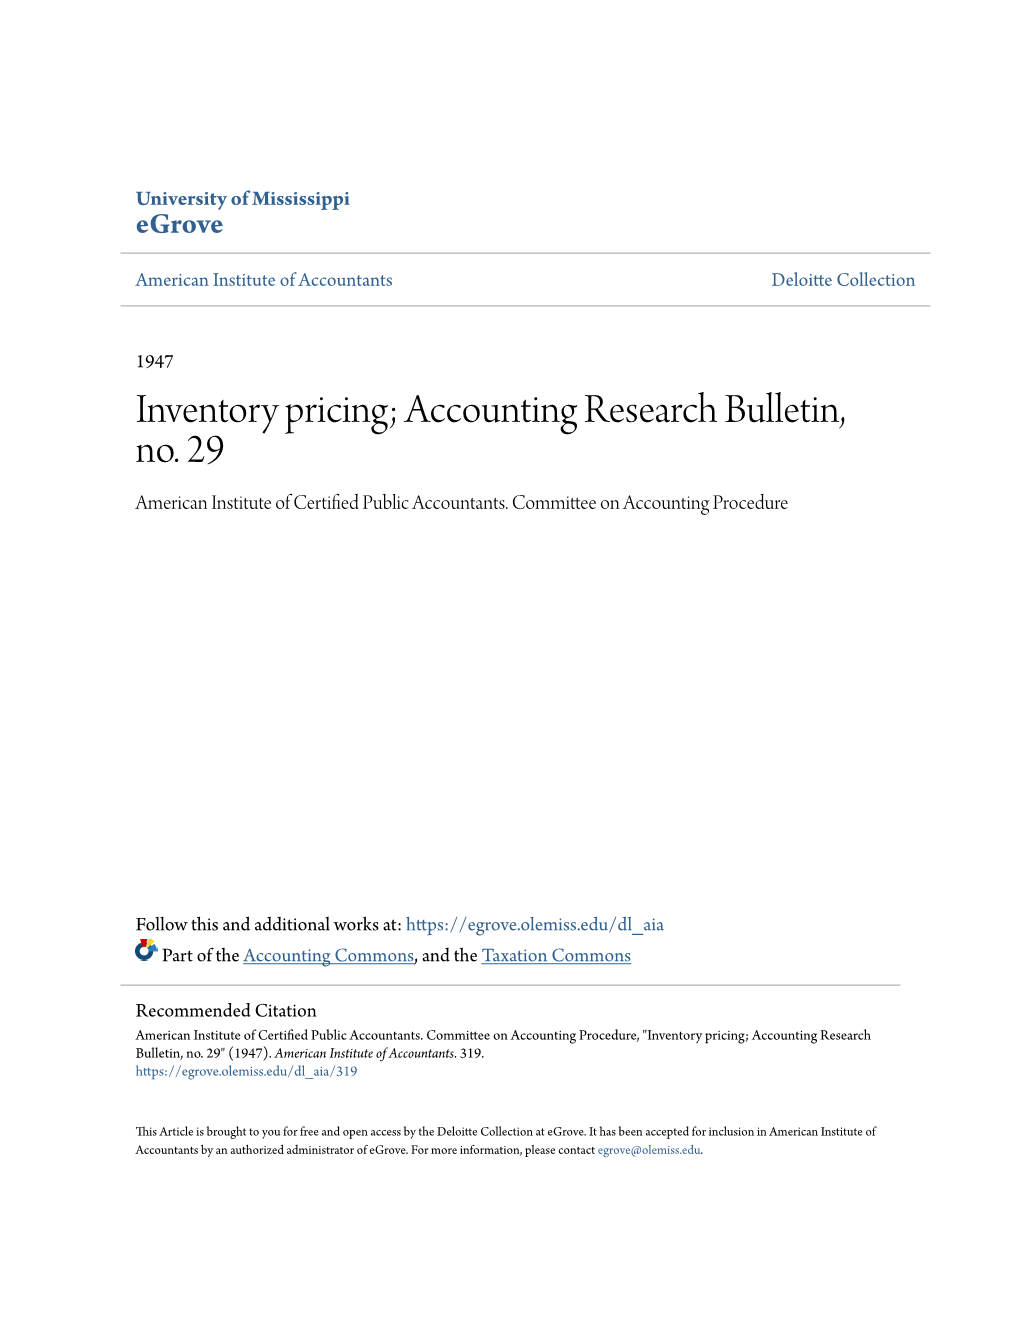 Inventory Pricing; Accounting Research Bulletin, No. 29 American Institute of Certified Public Accountants